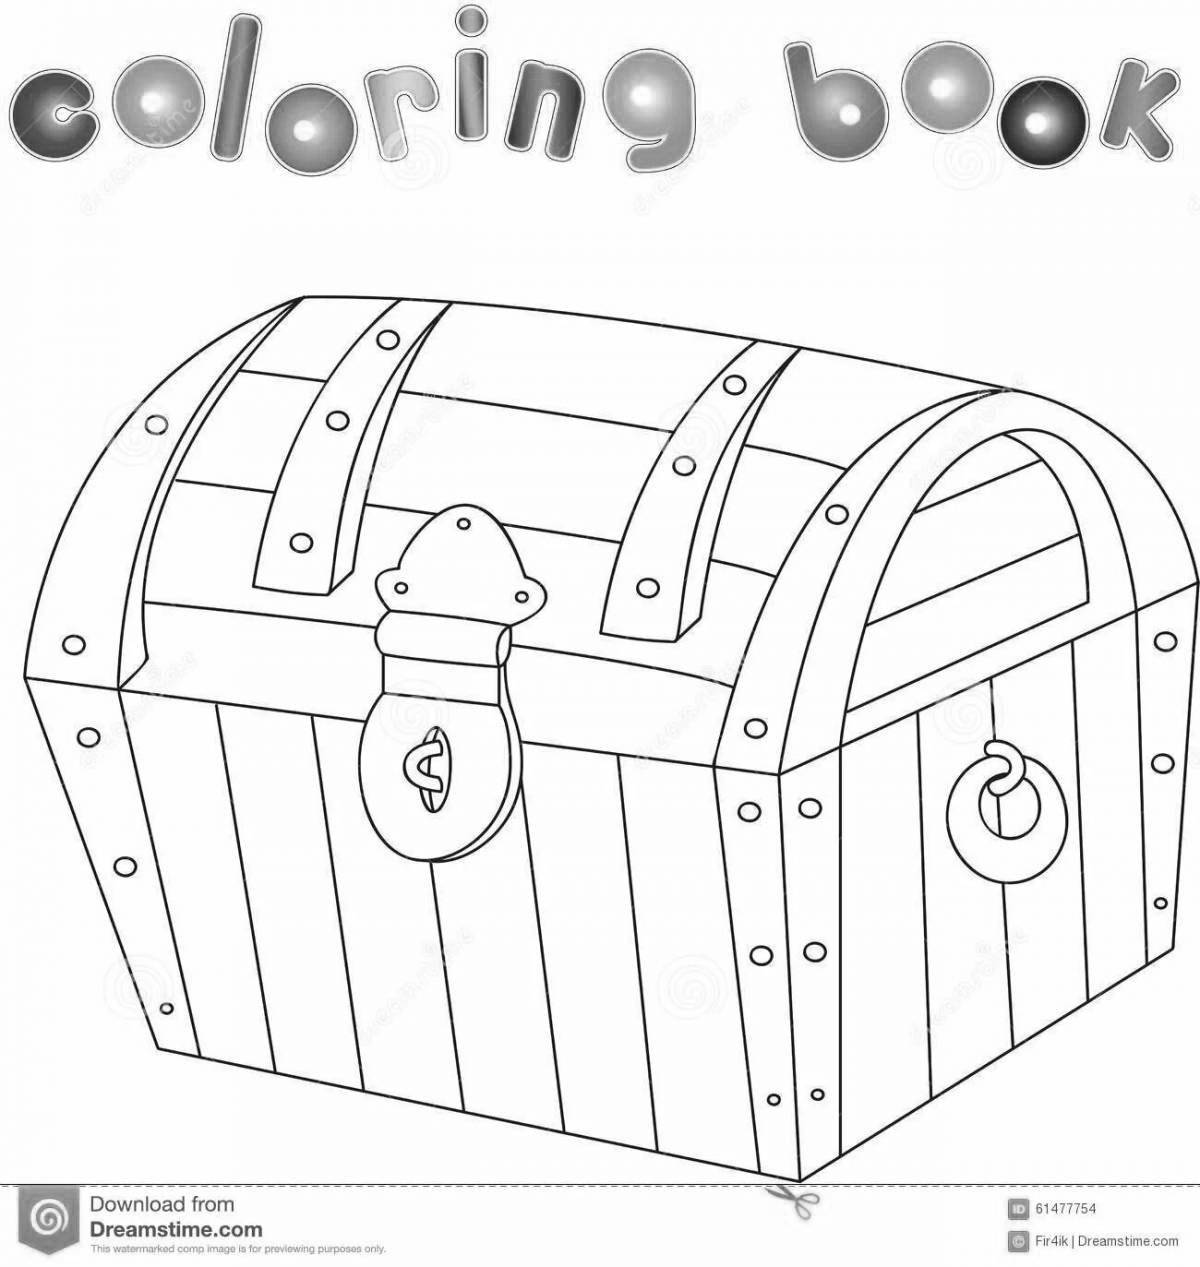 Great chest coloring for kids